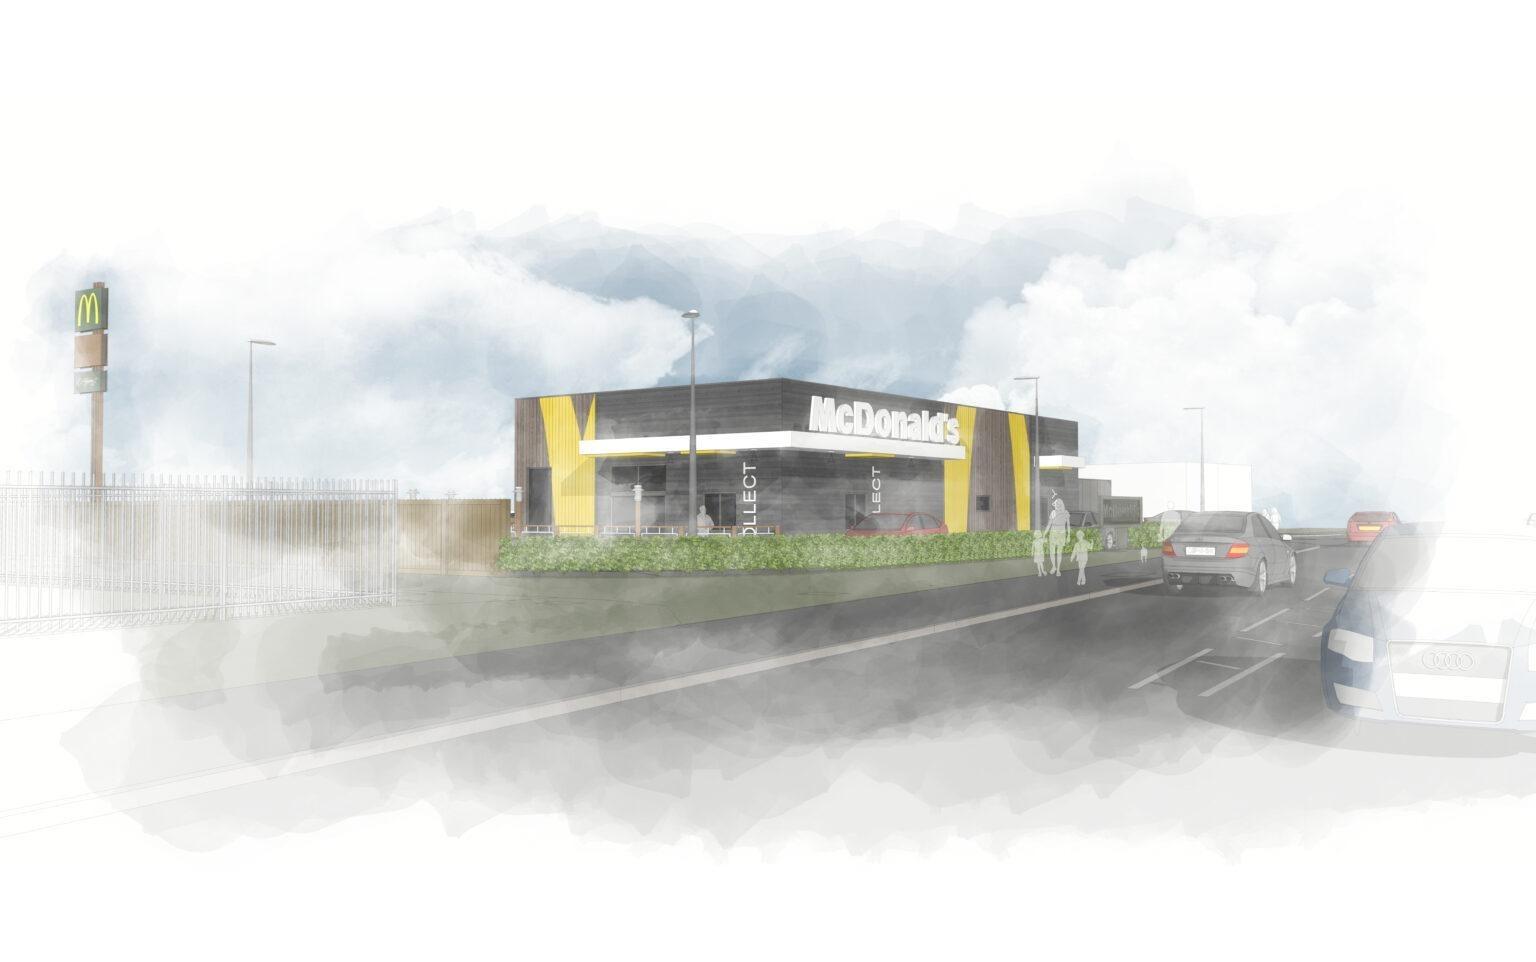 Plans submitted for McDonald's drive-thru in Ellon